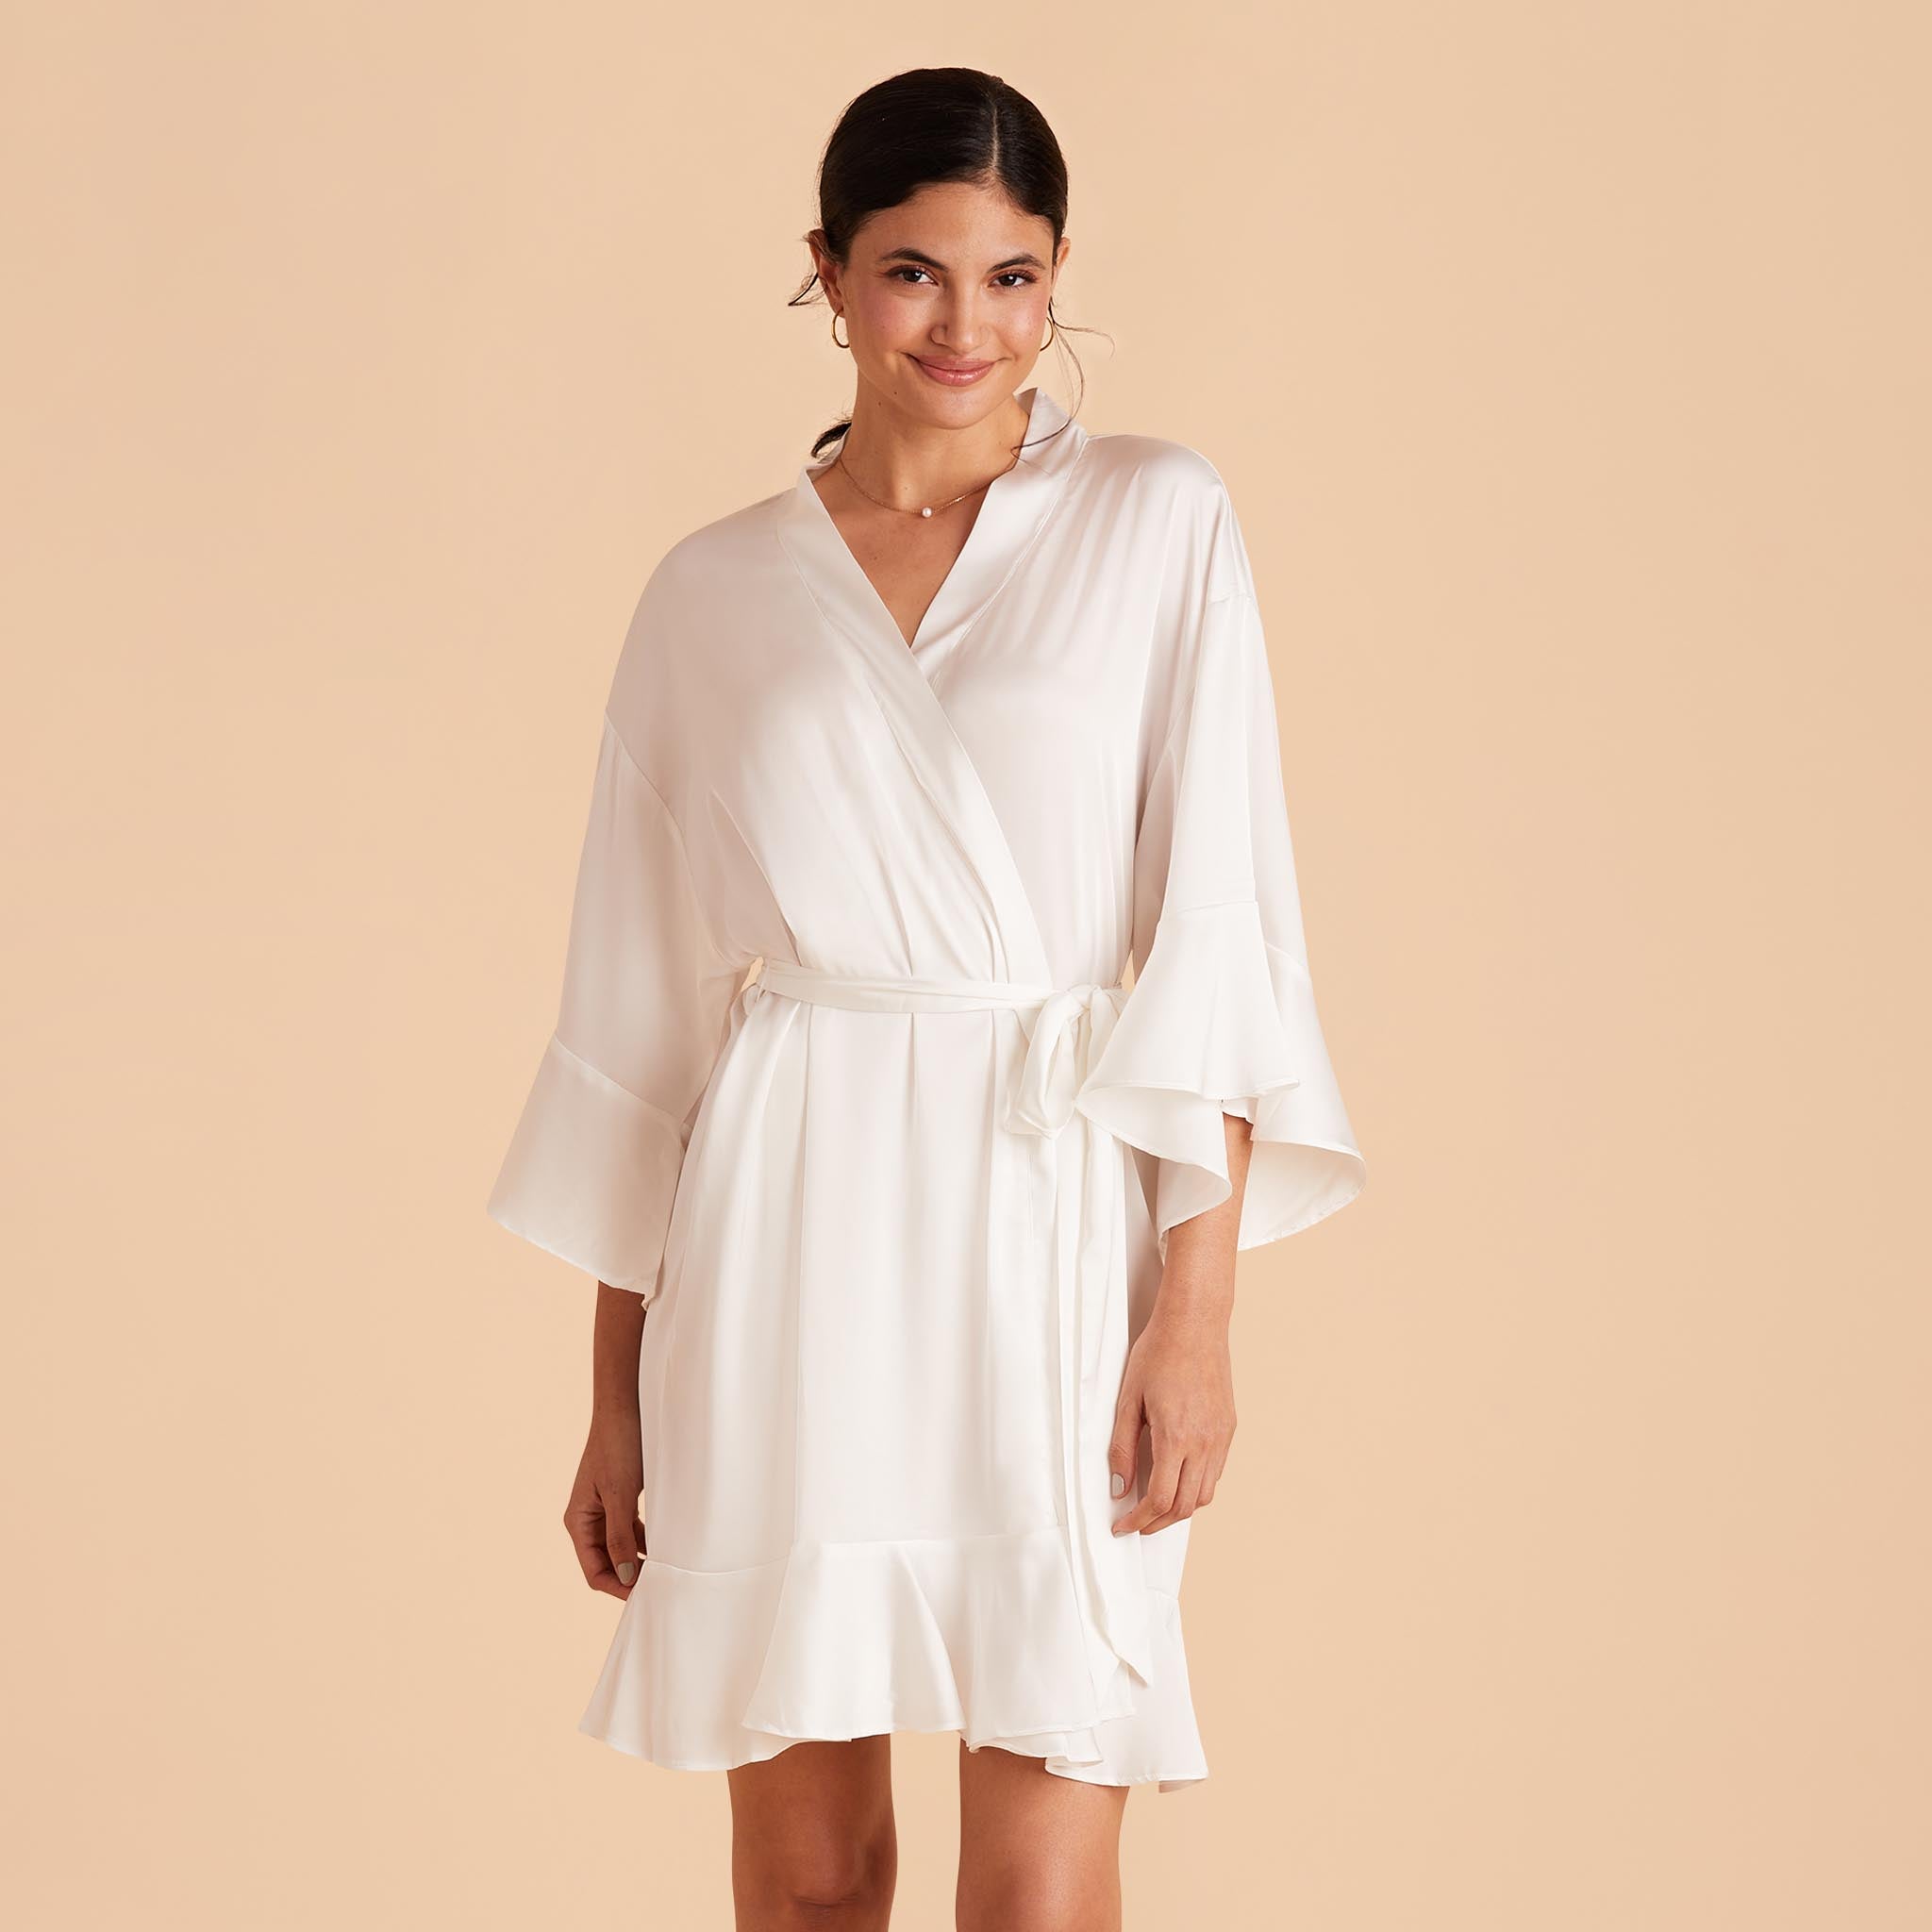 Kenny Ruffle Robe in ivory satin by Birdy Grey, front view